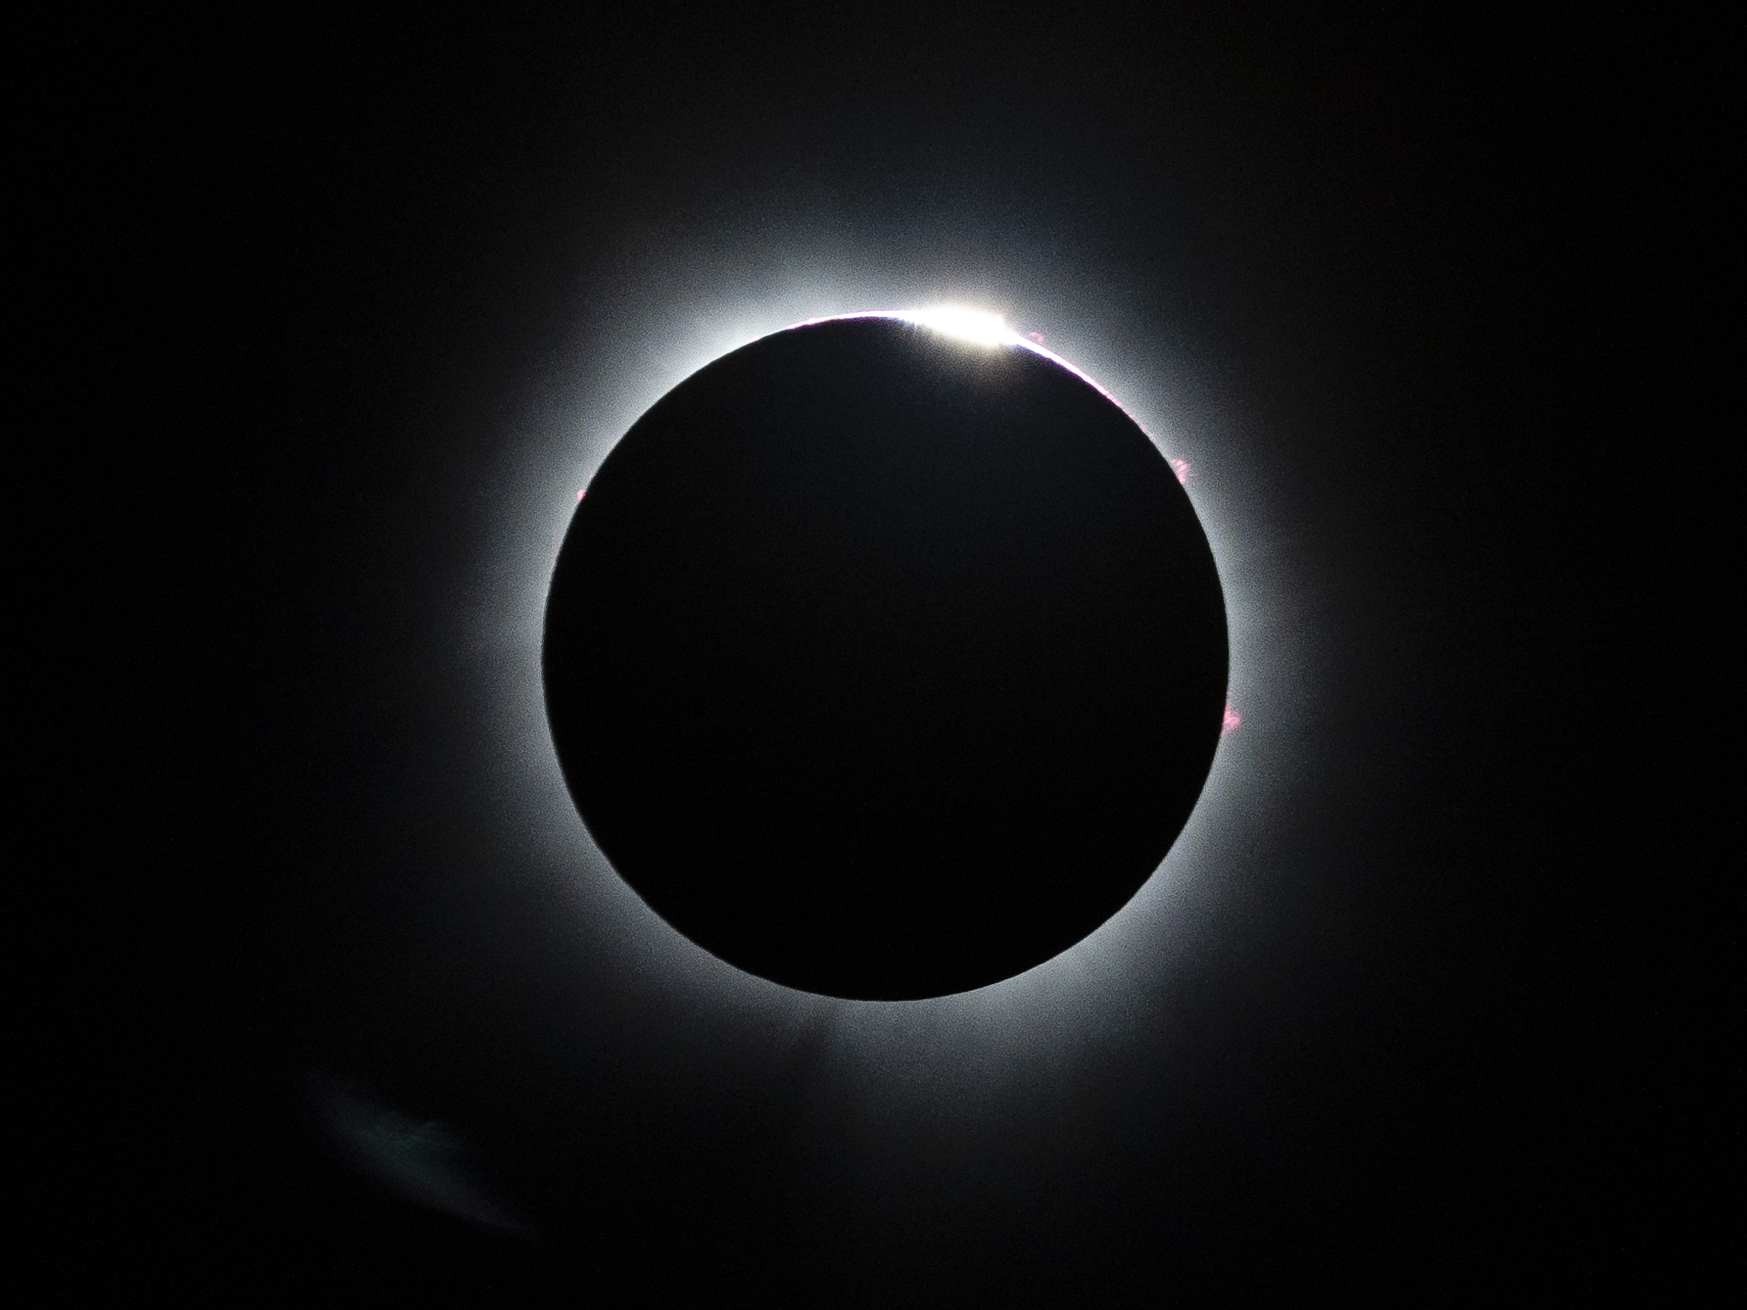 The moon passes the sun during a solar eclipse on Monday in Ste. Genevieve, Mo.